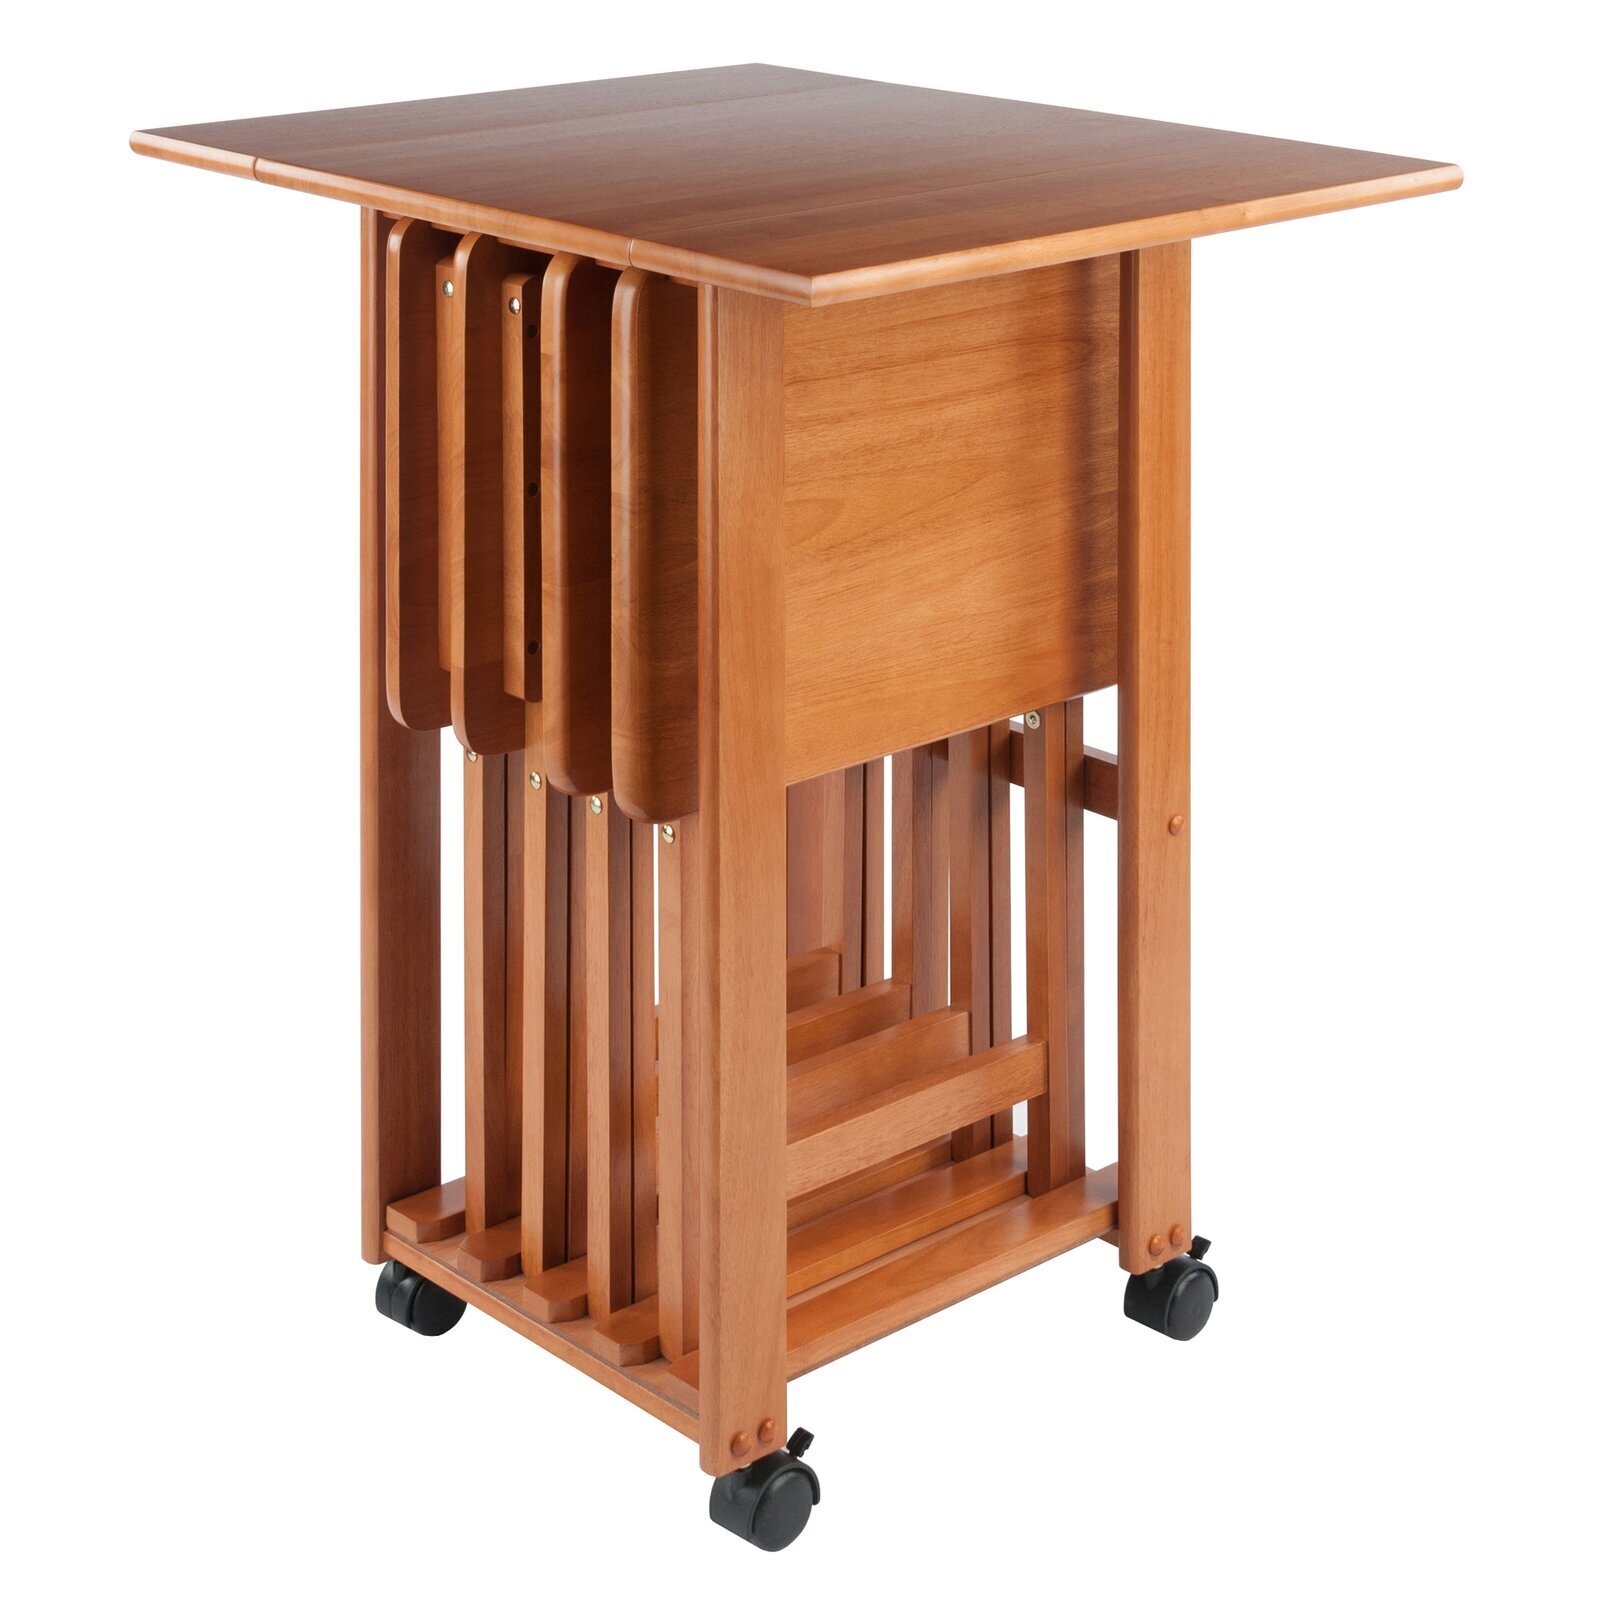 Solid wood adjustable tray table